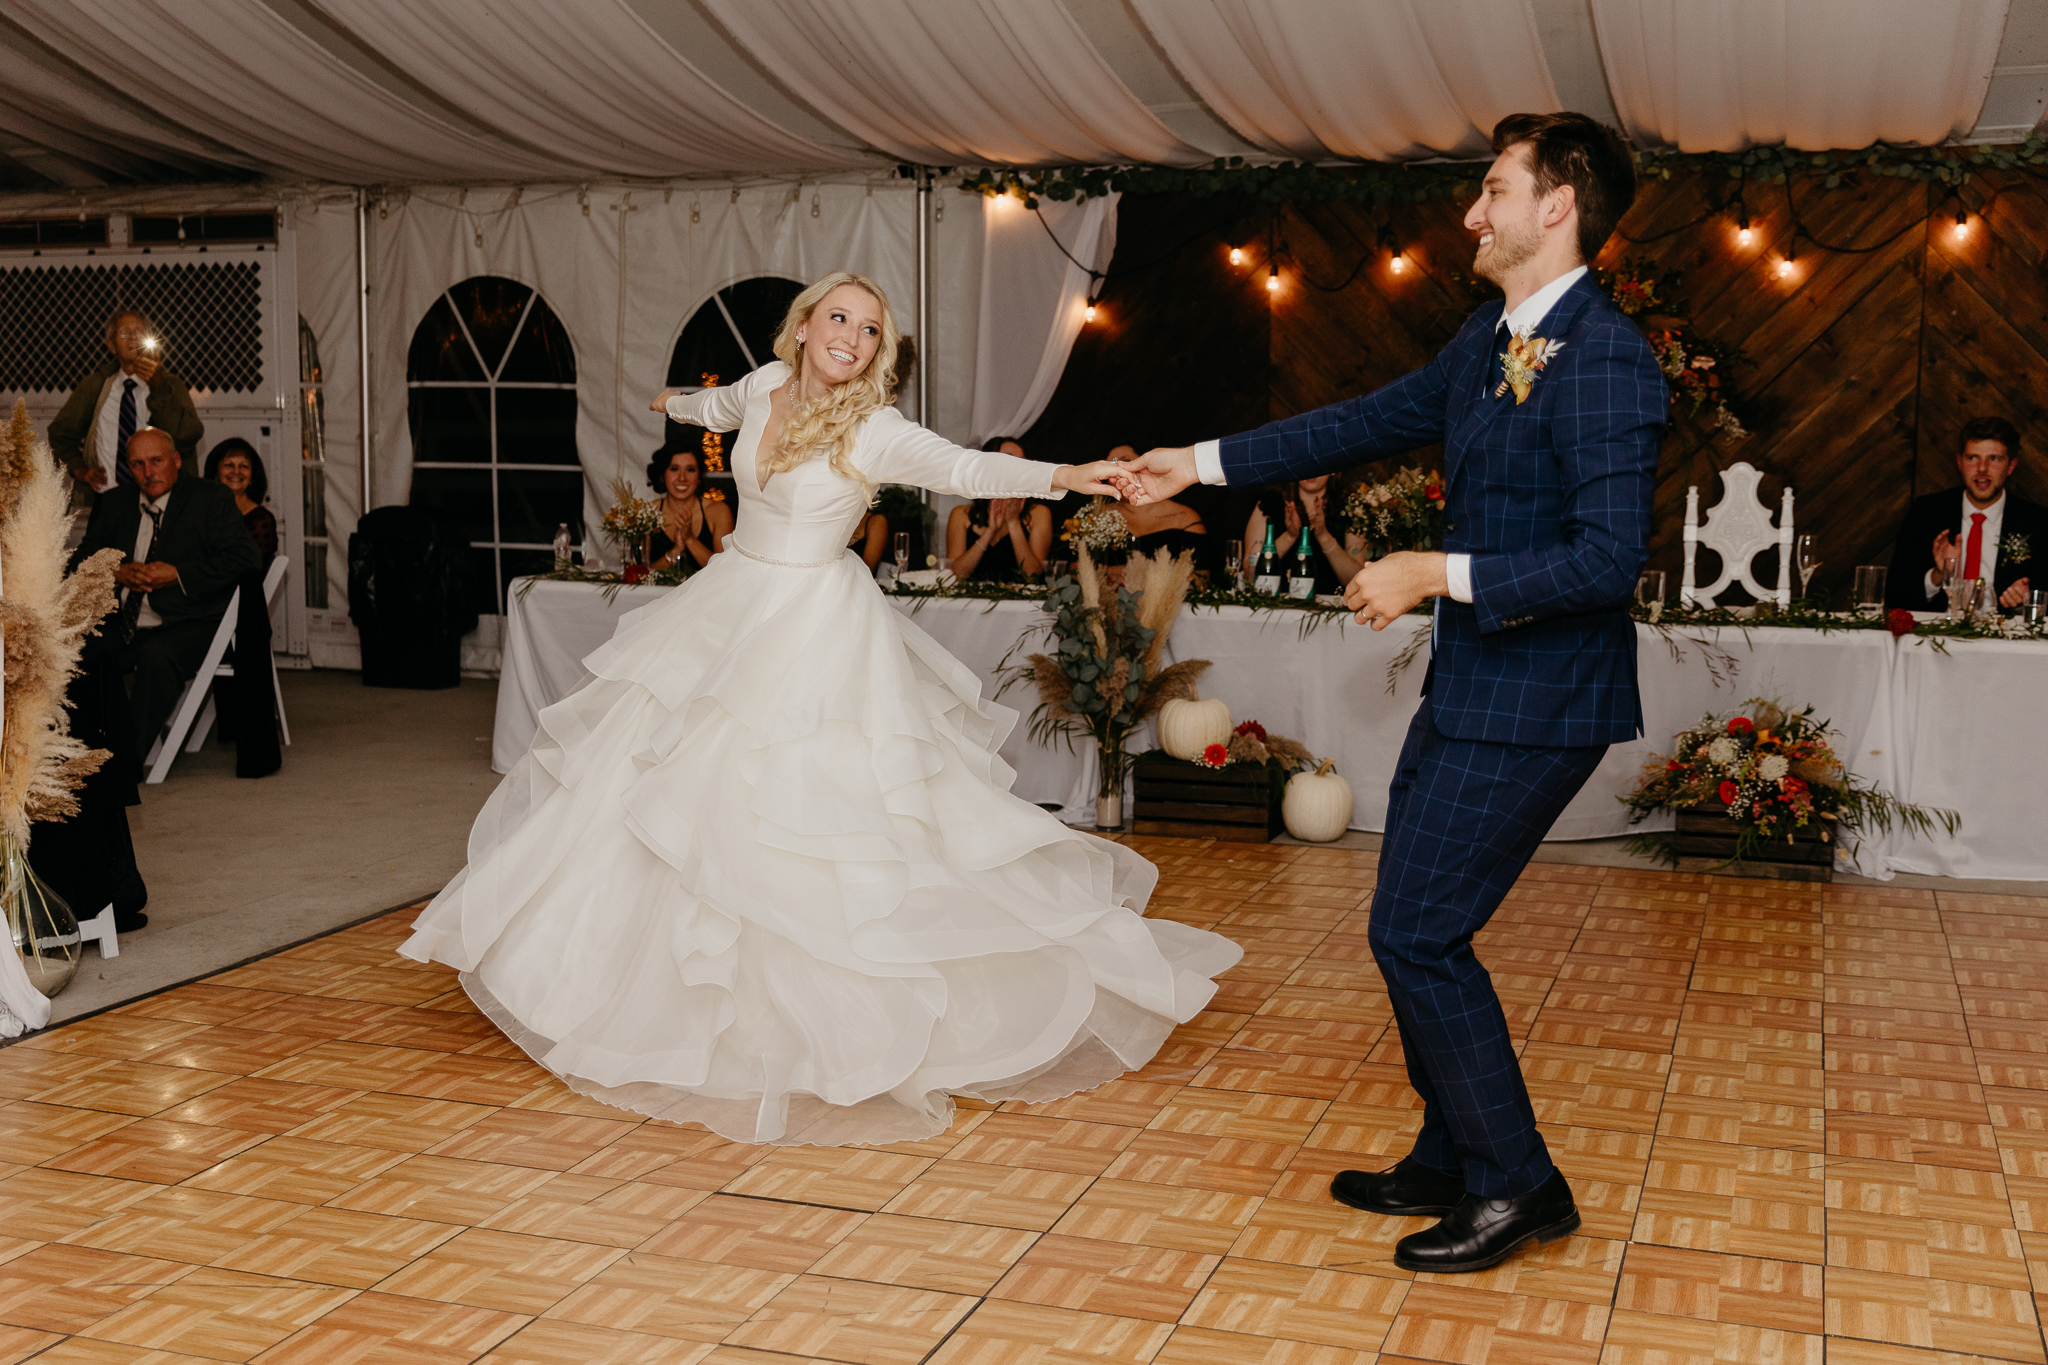 Bride and groom dancing together during their first dance, in a white tent wedding